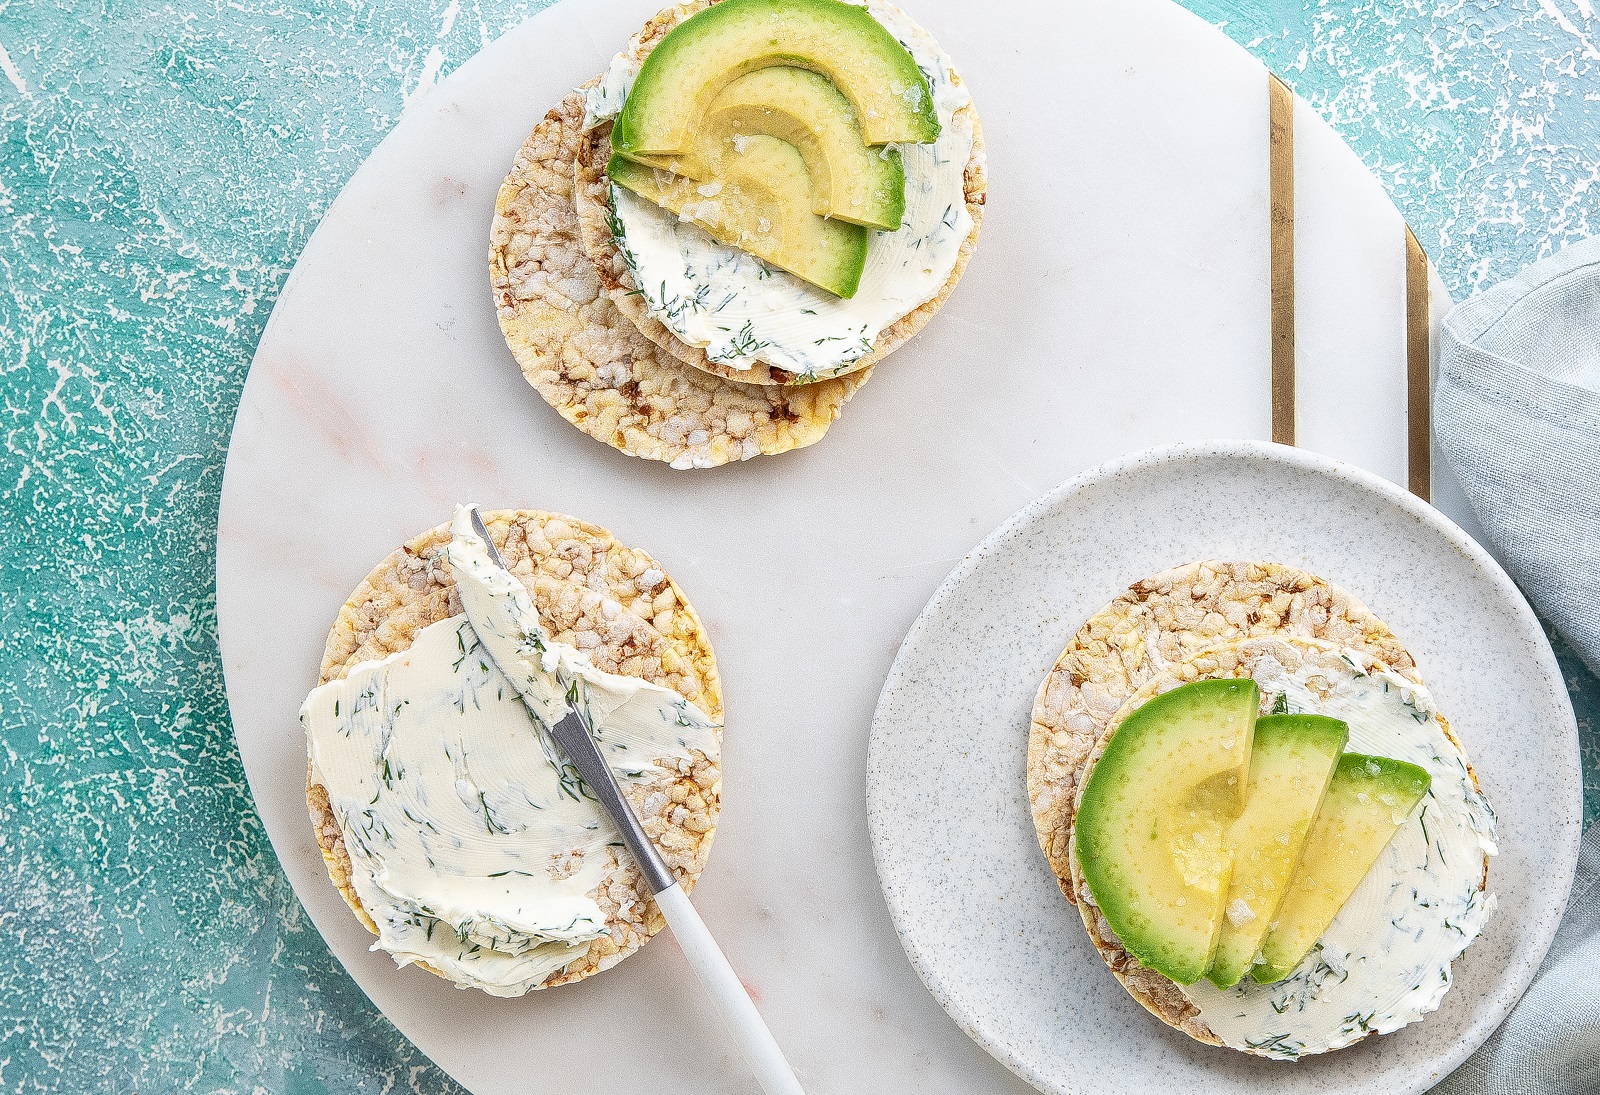 Dill Cream Cheese & Avocado on CORN THINS slices